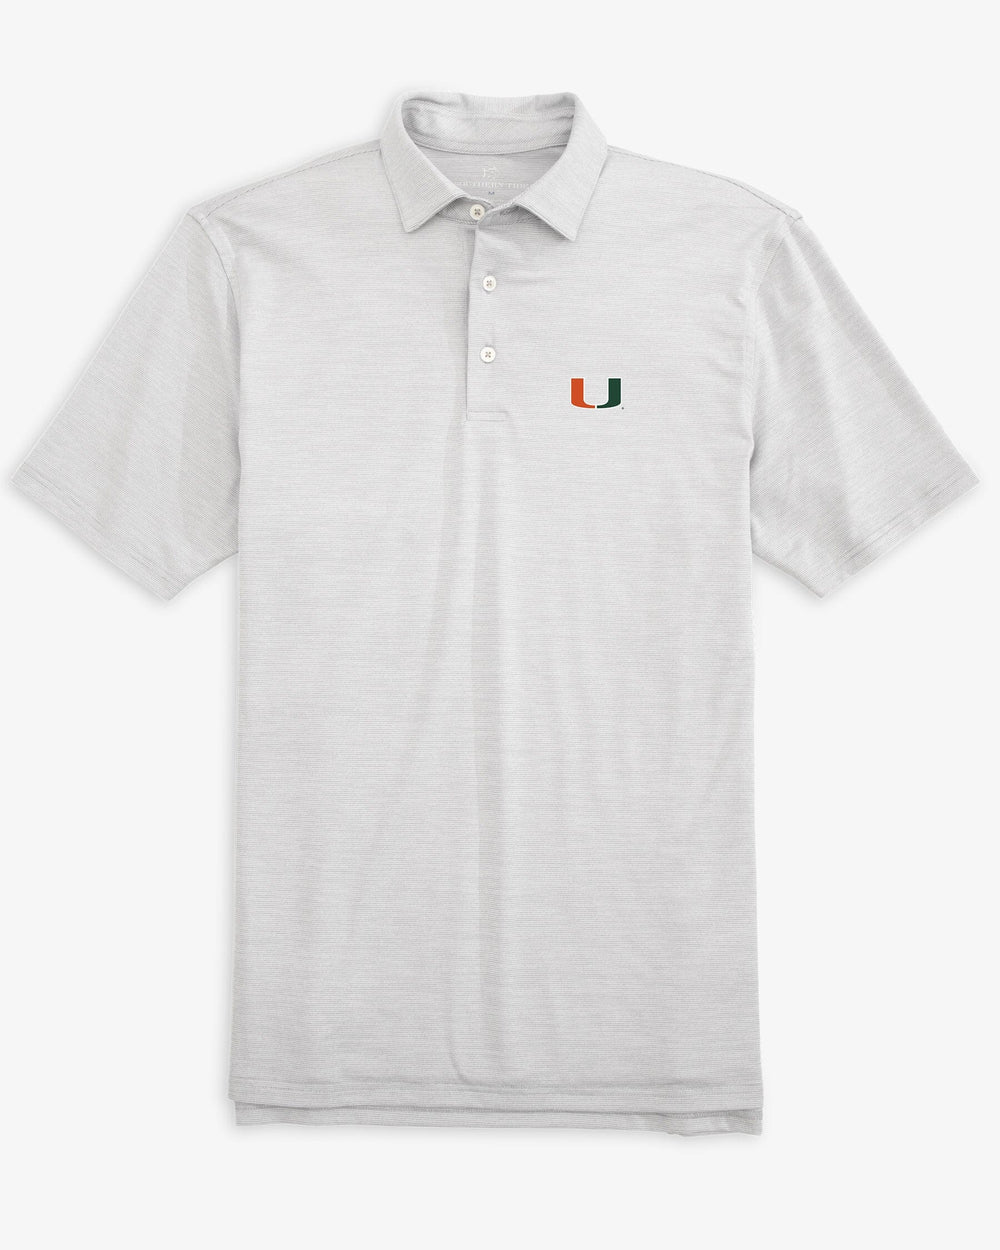 The front of the Men's Miami Hurricanes Driver Spacedye Polo Shirt by Southern Tide - Slate Grey